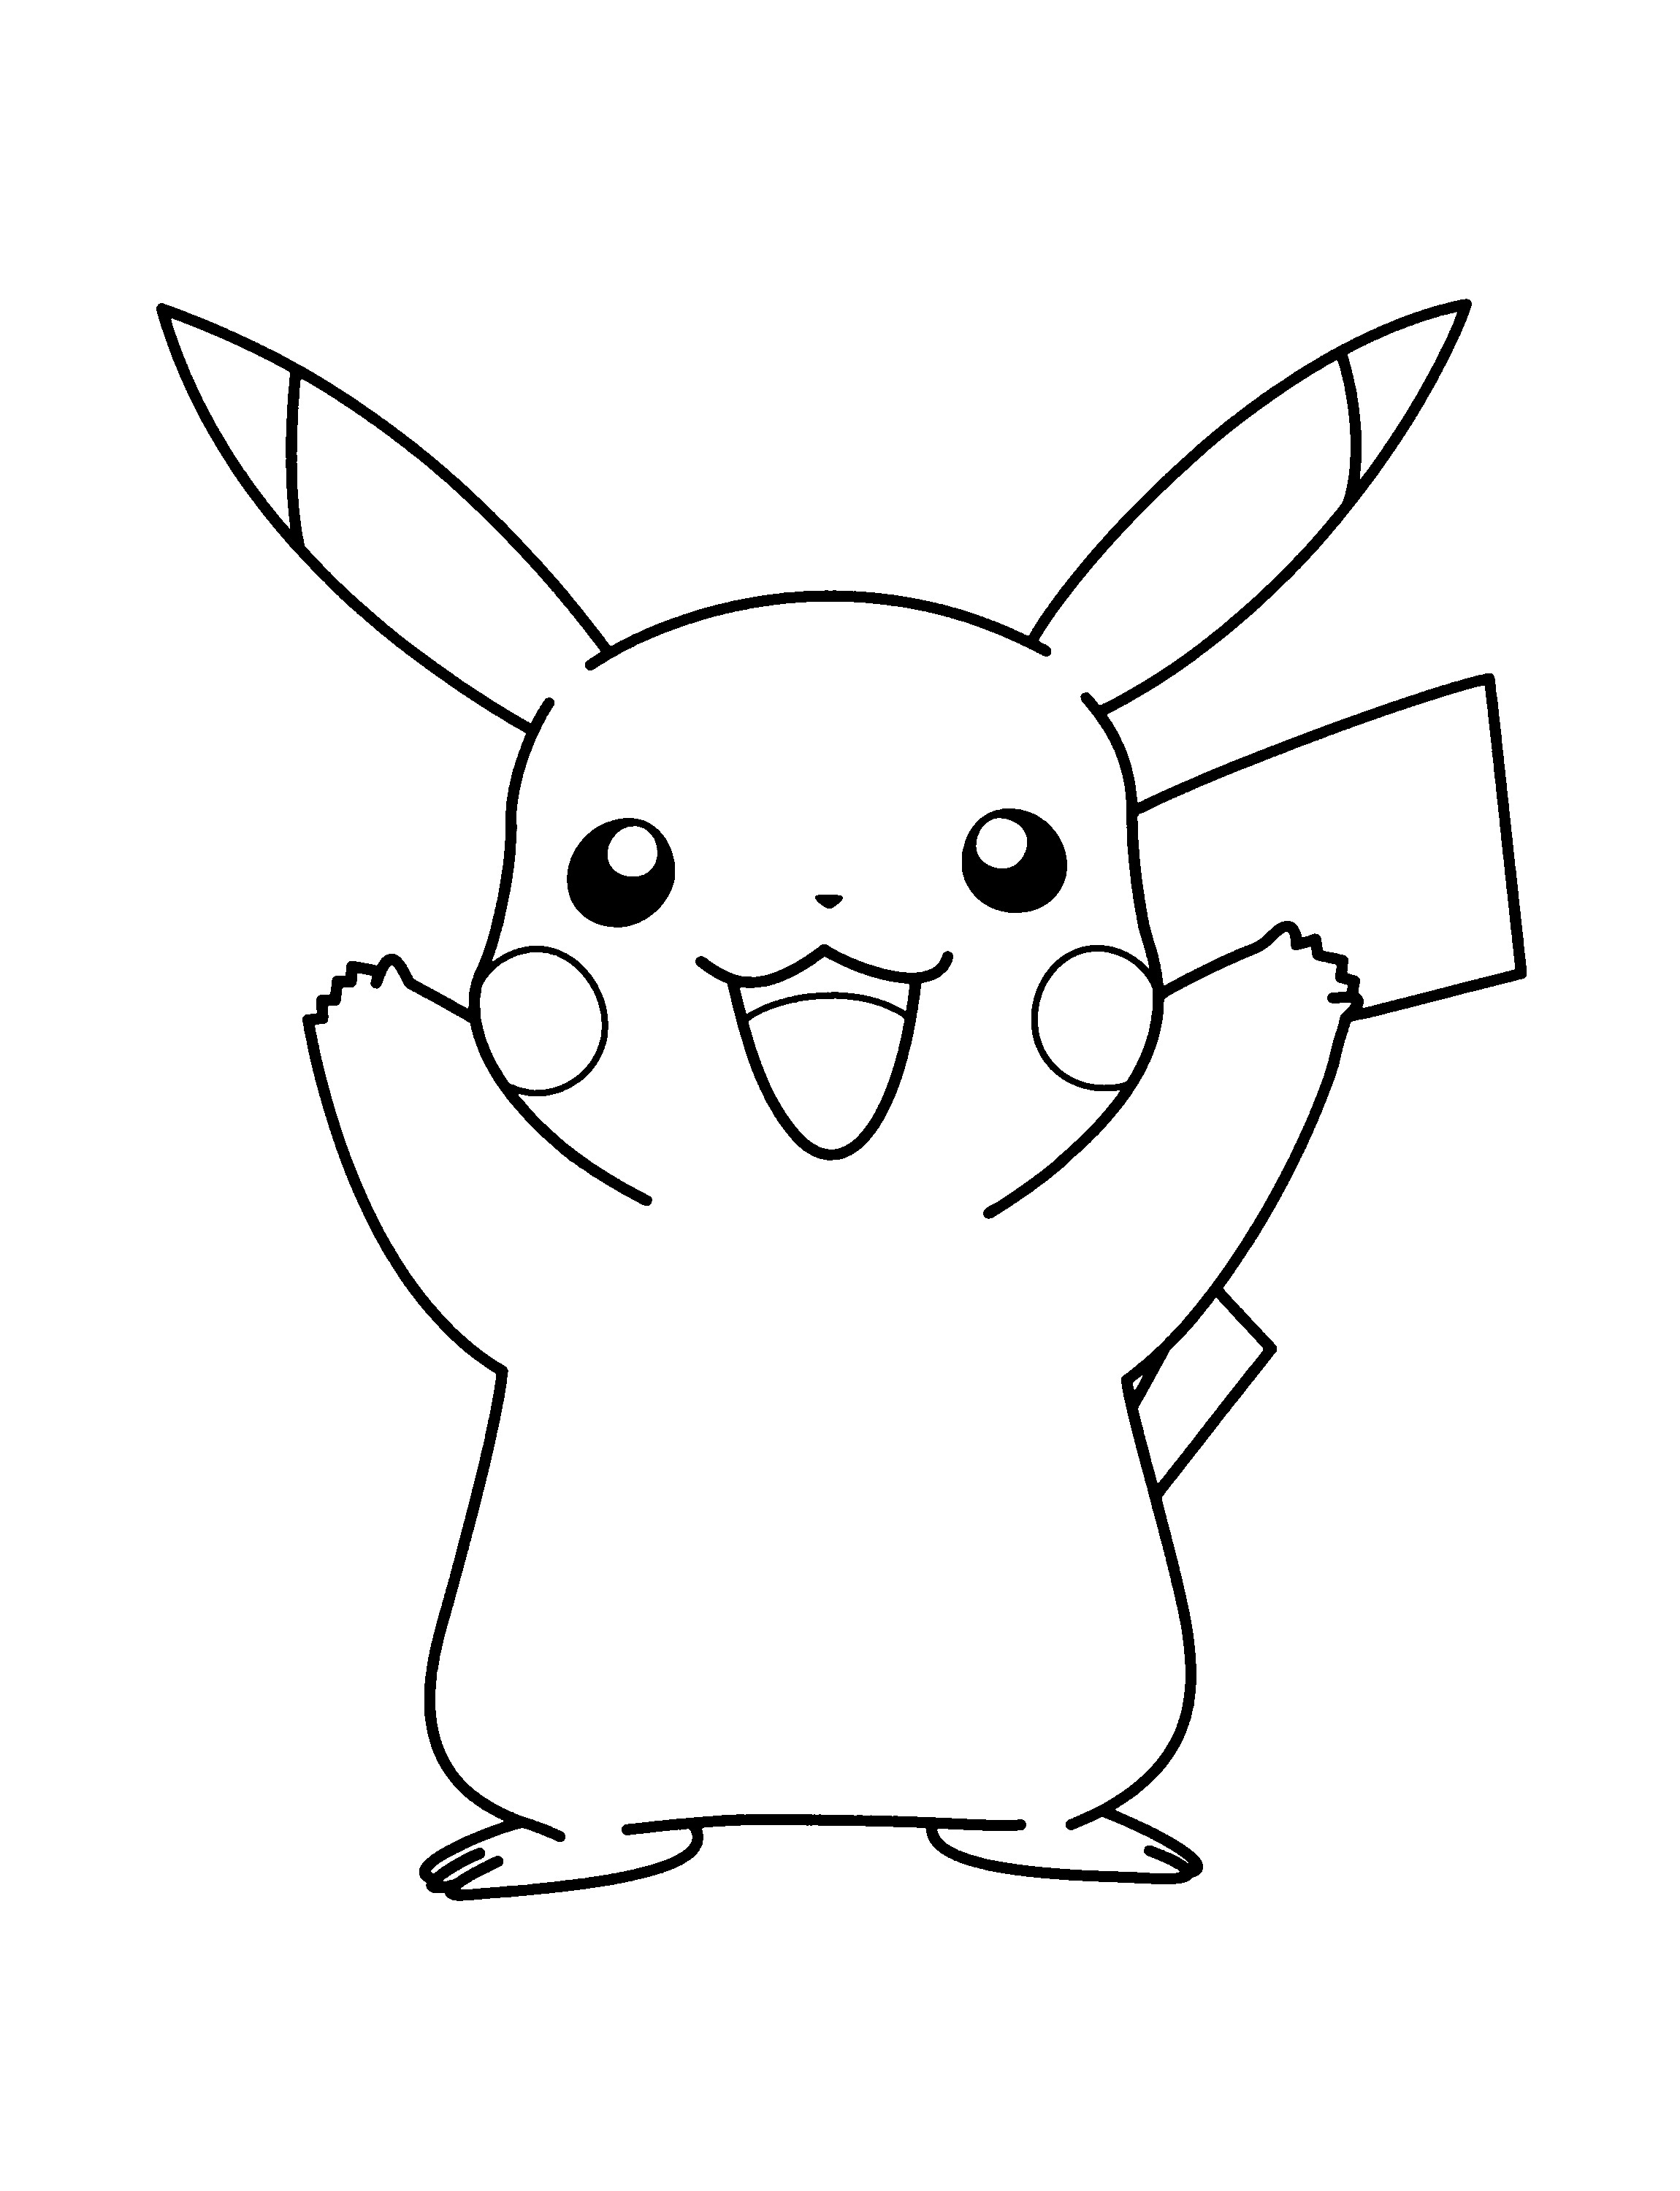 animated-coloring-pages-pokemon-image-0803